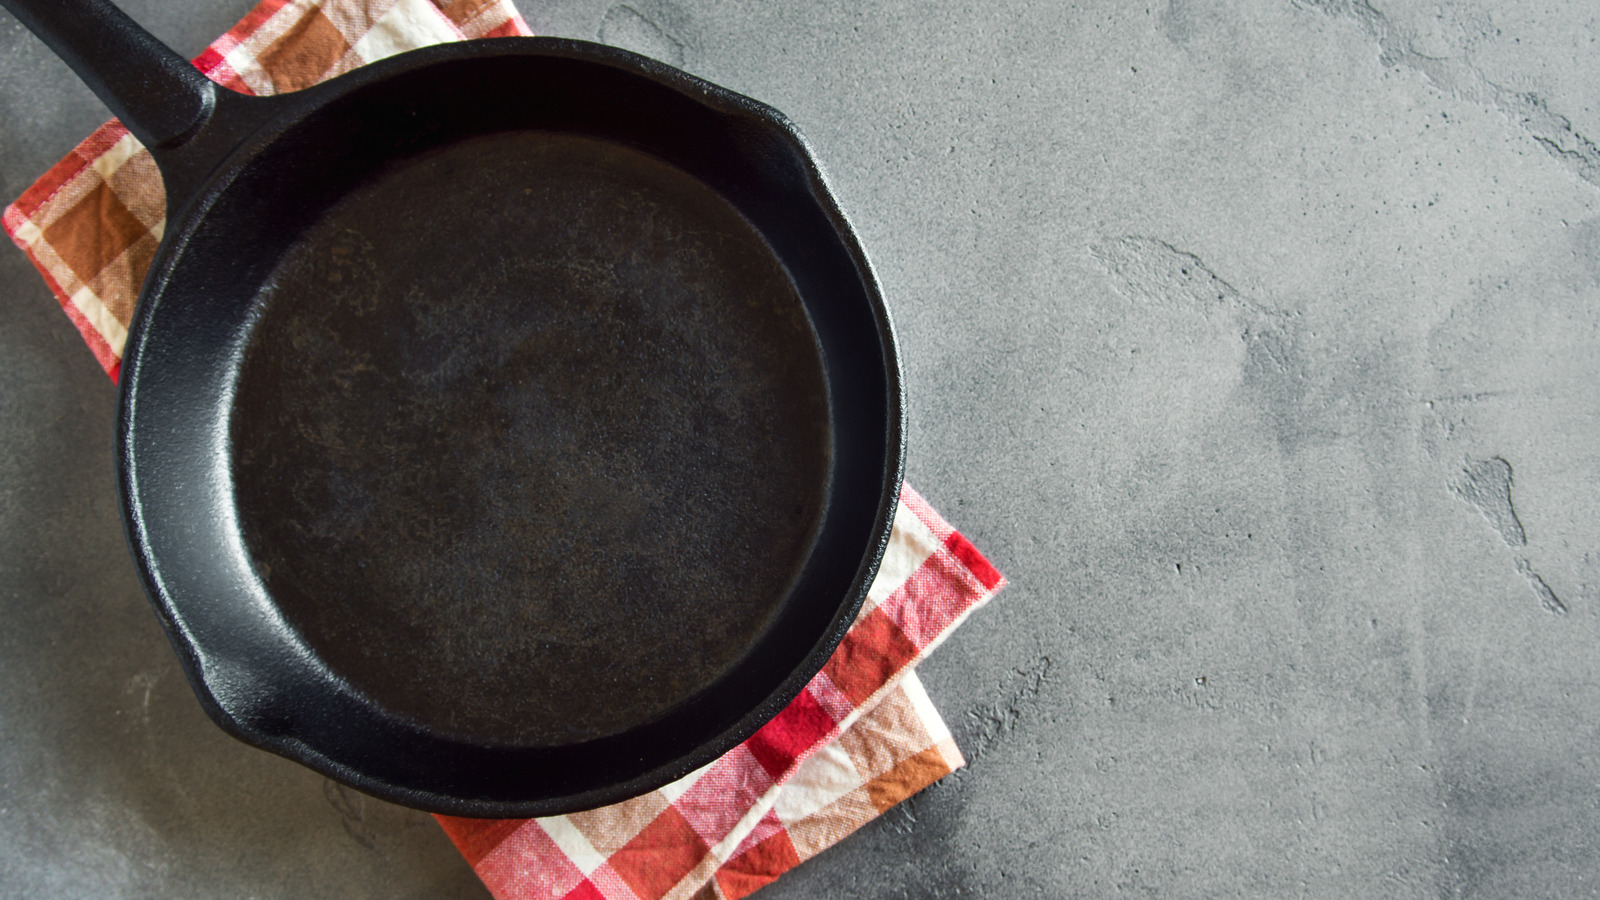 How Introducing a Lid Adds Control to Your Cast Iron Cooking